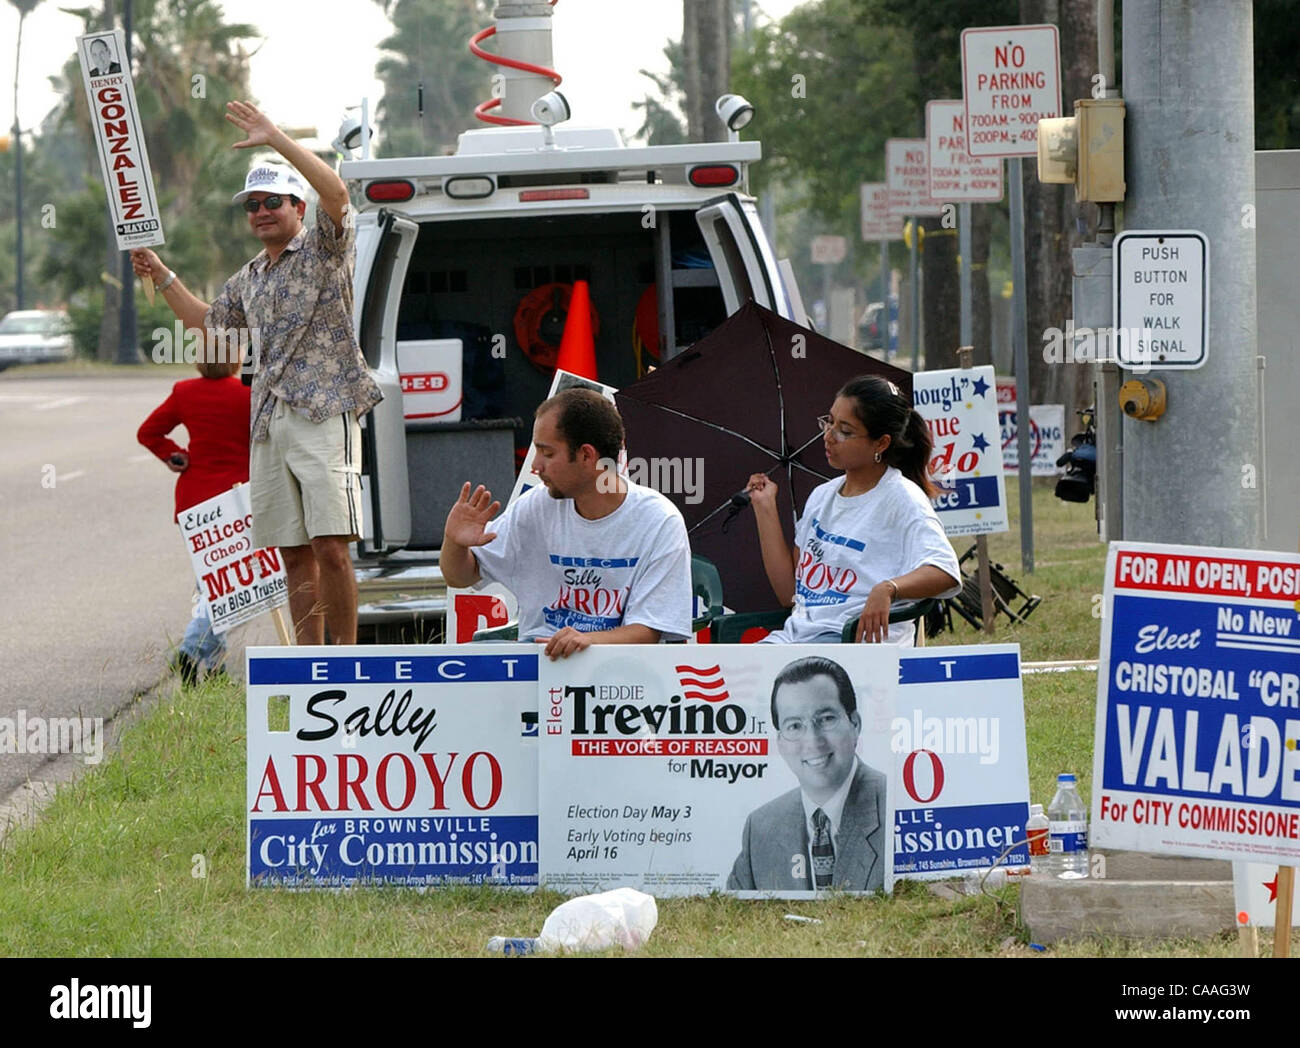 STATE/DAILY/ BROWNSVILLE ELECTIONS: Peter Ruiz, Ovidio Cisneros and Yadira Hernandez campaign for their own candidate at Sharp Elementary in Brownsville, Texas May 3, 2003. DELCIA LOPEZ/STAFF Stock Photo